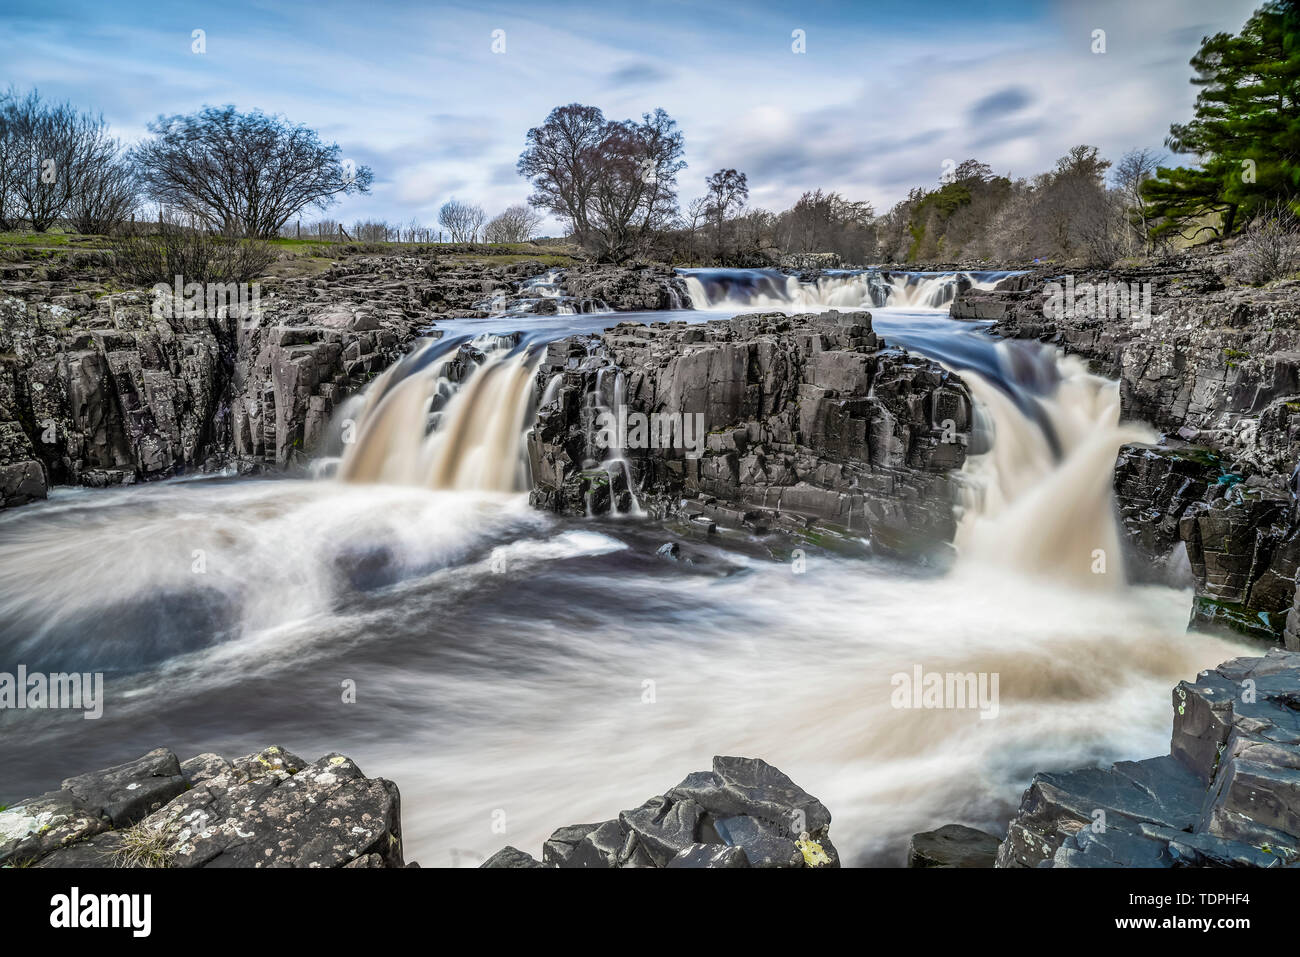 Low Force in Upper Teesdale, North of England where the River Tees tumbles over the Whin Sill, a layer of hard dolerite rock which formed 295 milli... Stock Photo